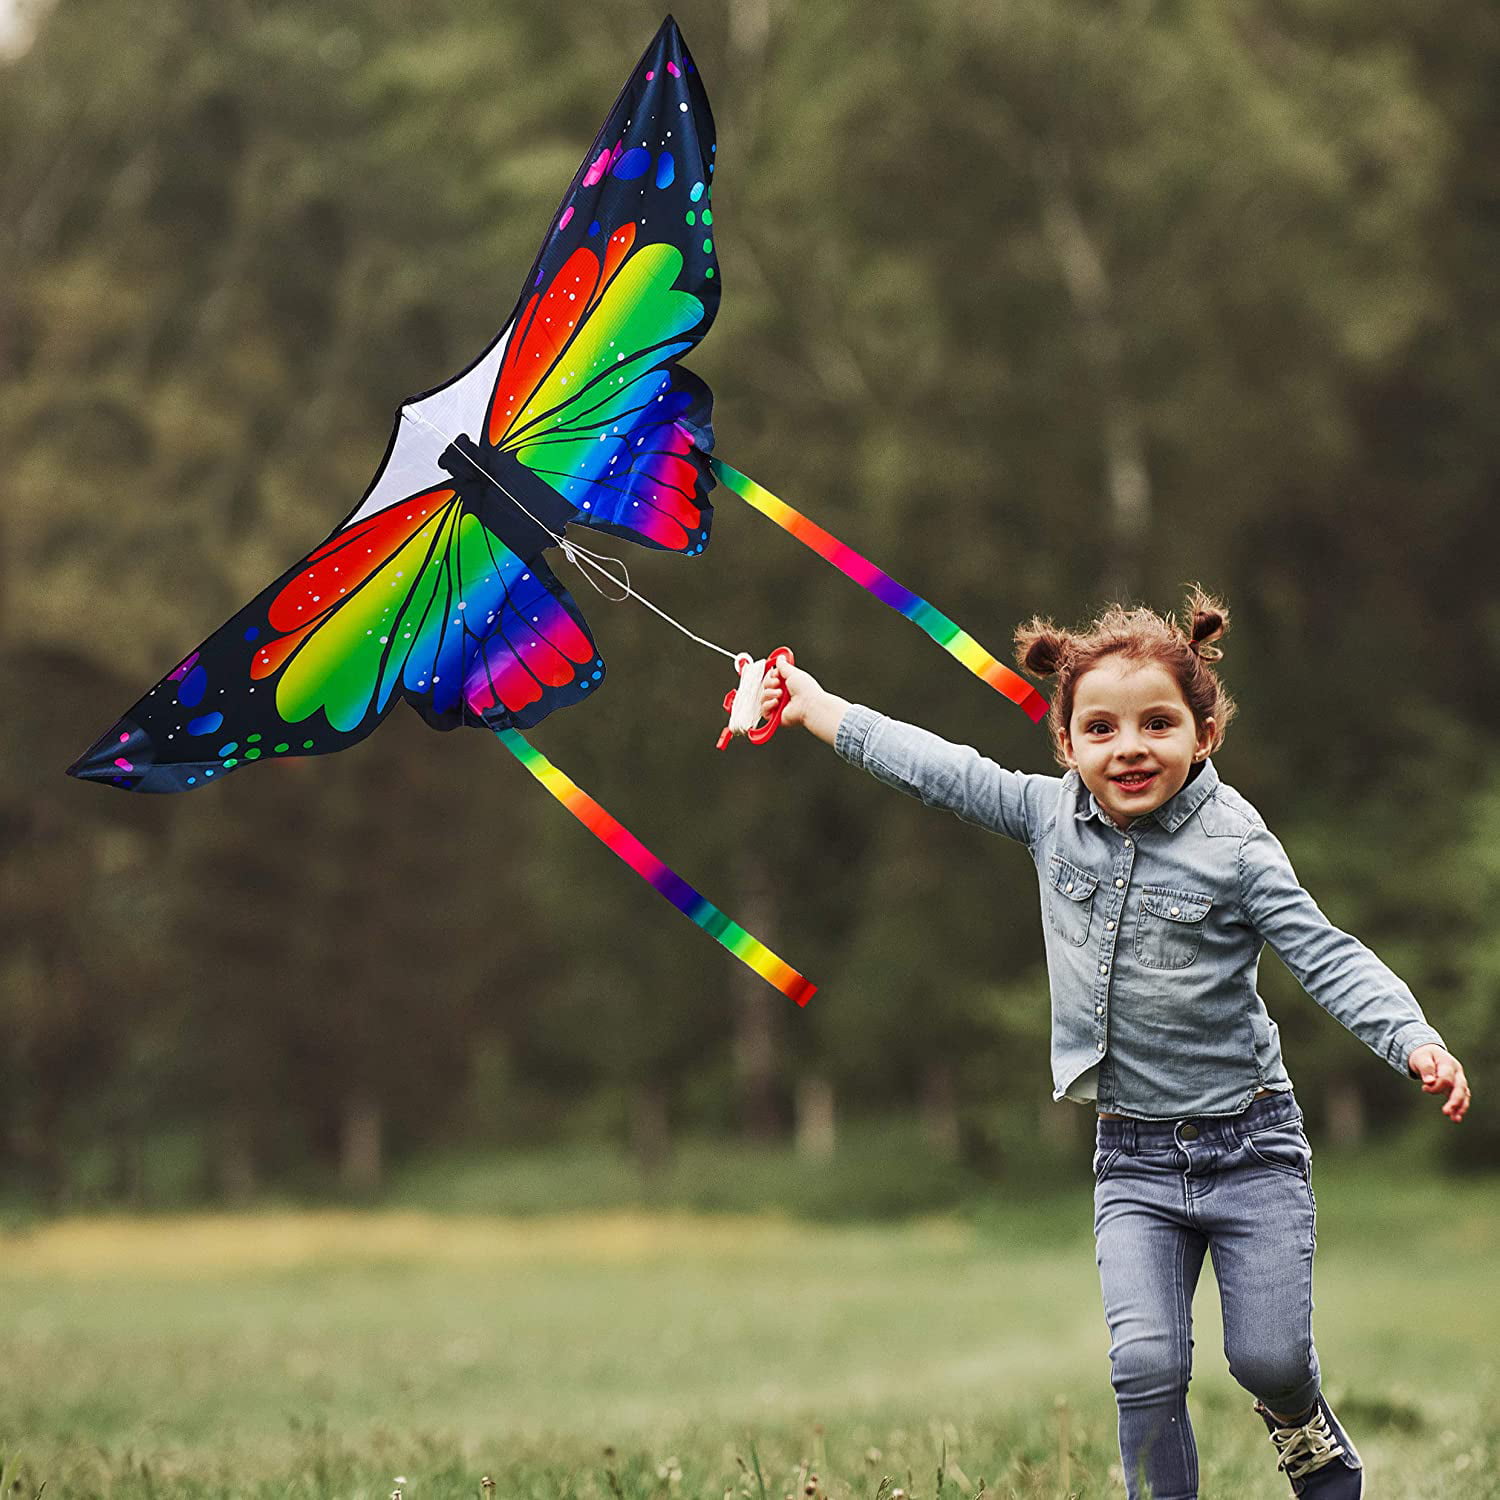 Rainbow Flying Kite  Colorful Kids Children Outdoor Game Fun Child Toy 95*160 cm 